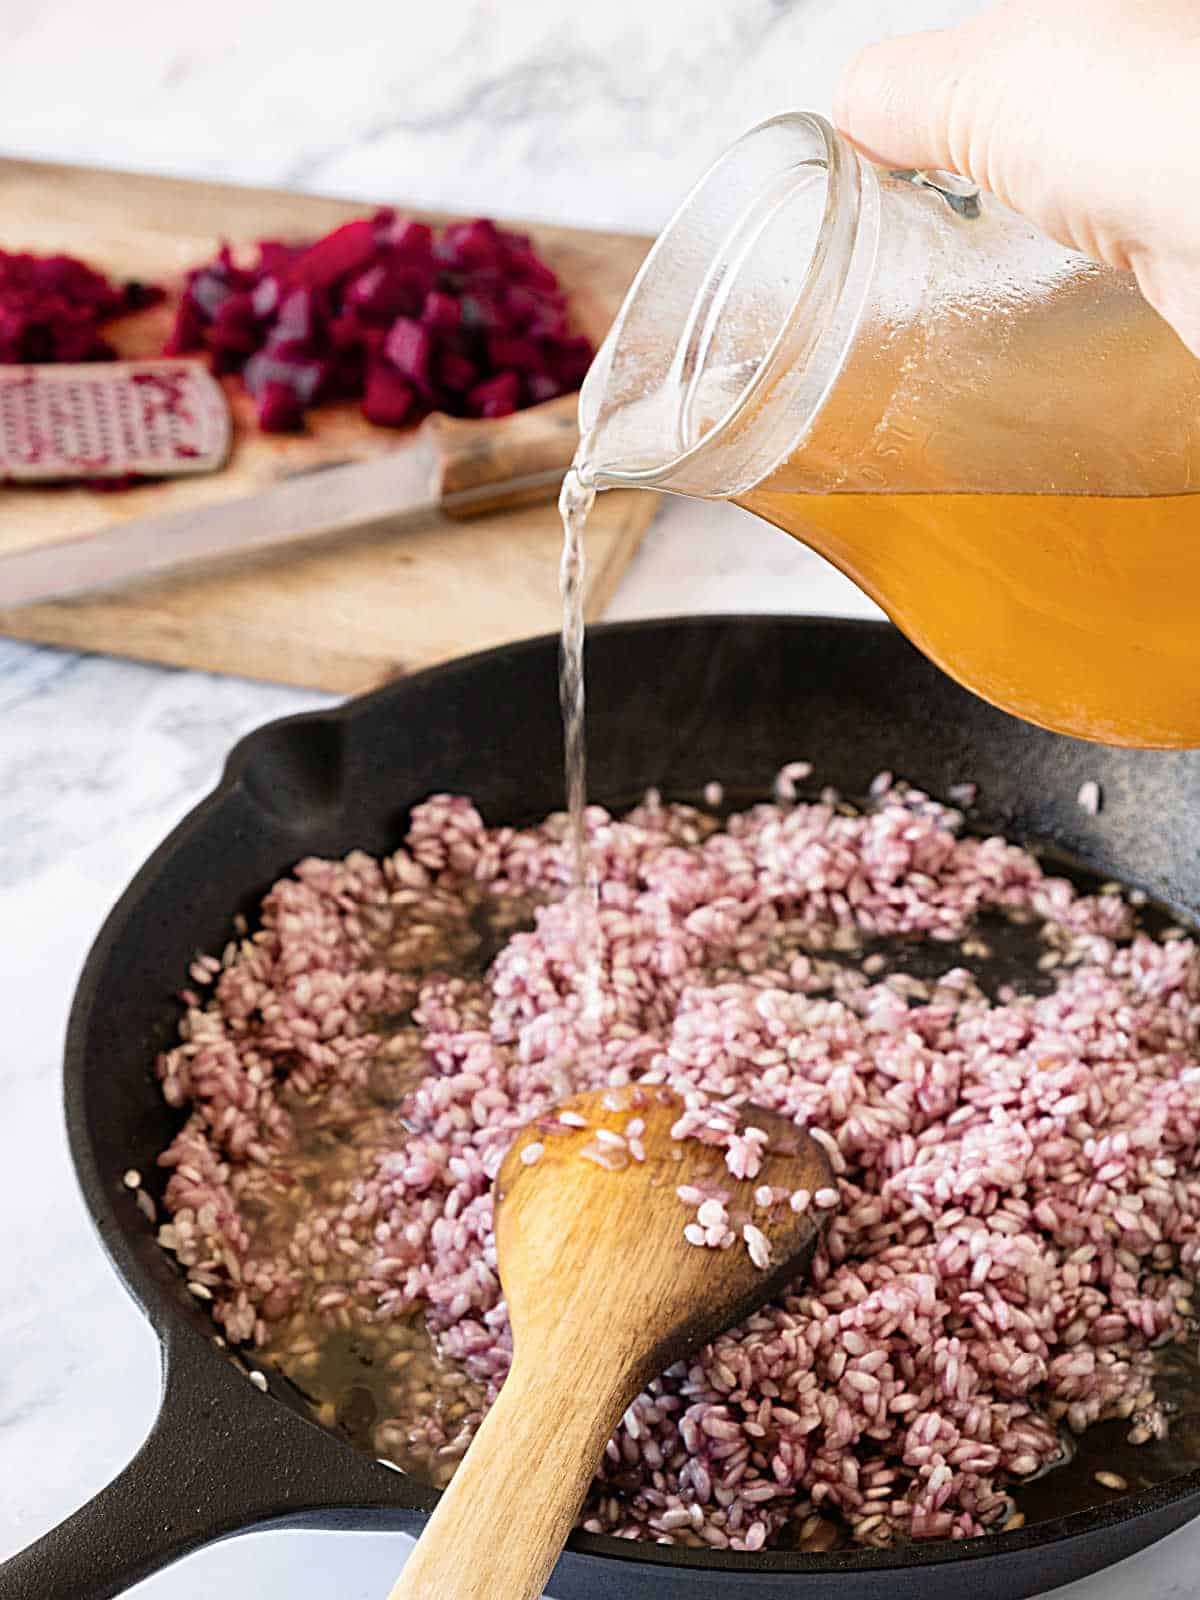 Adding broth from a jug to beet risotto in a cast-iron skillet. Wooden spoon inside.